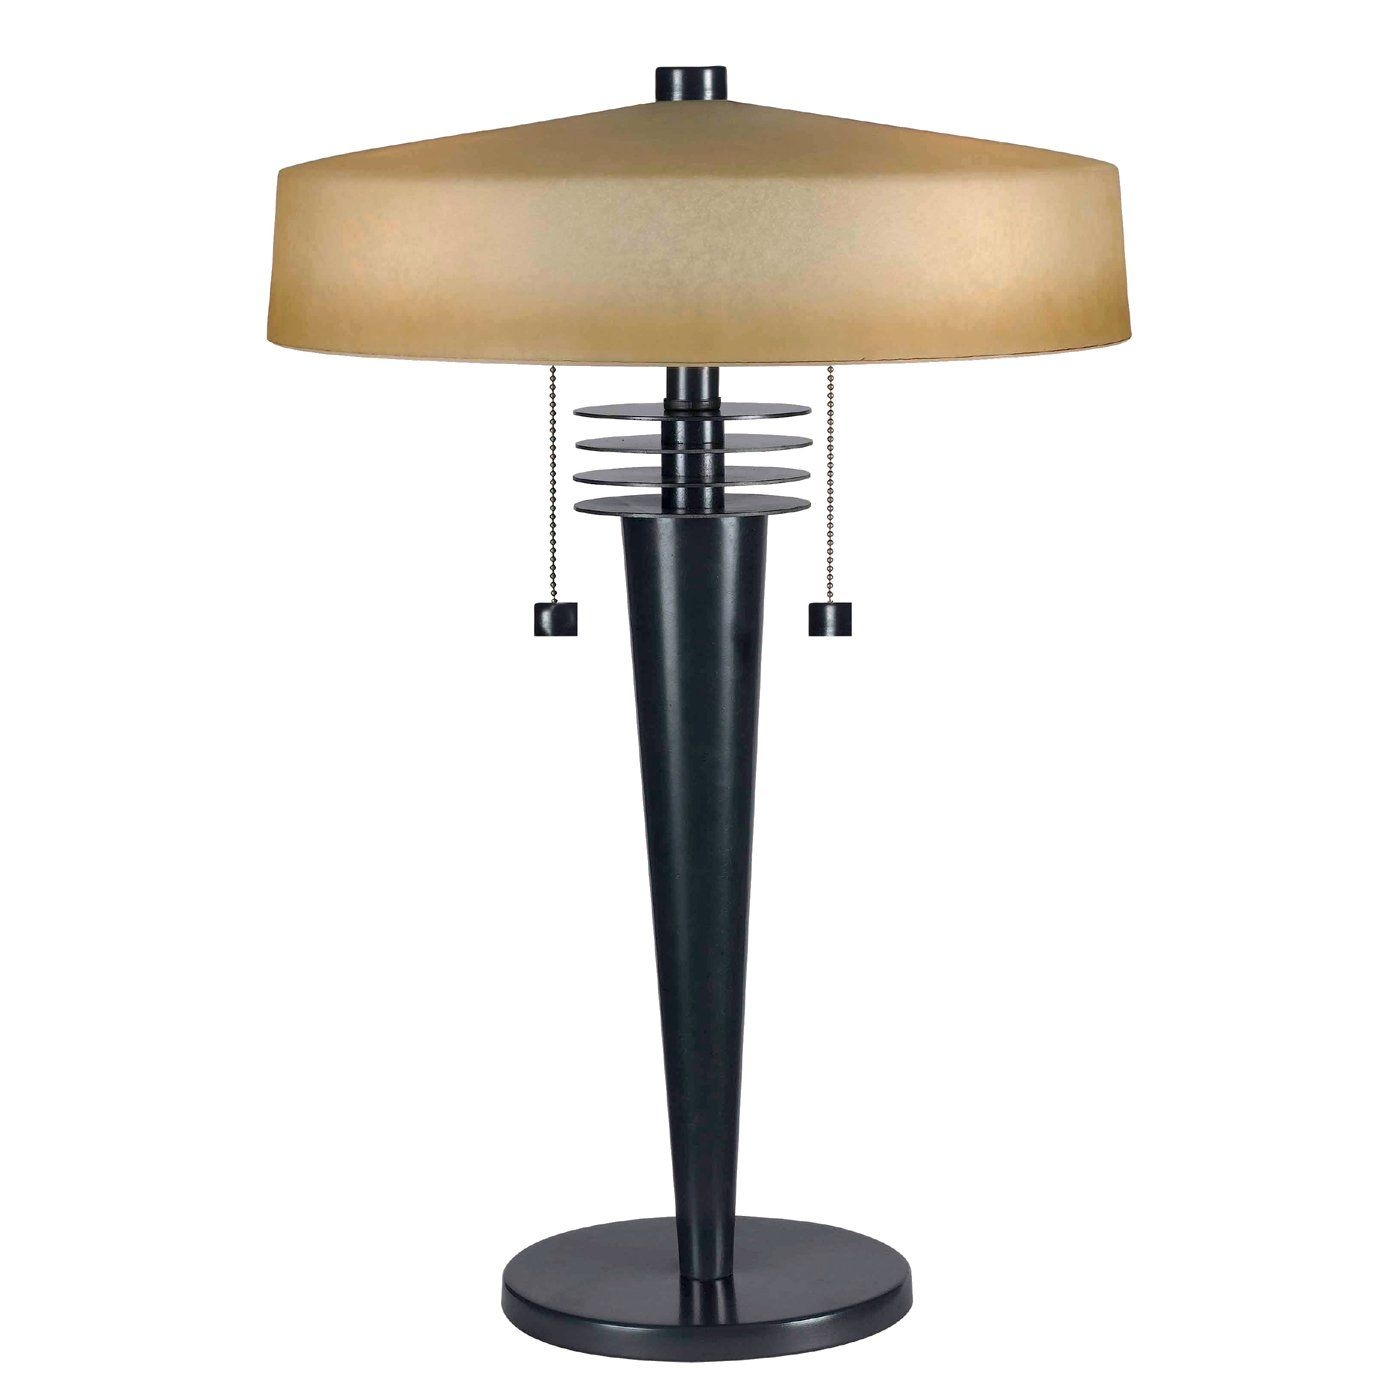 Windham 23.25" H Table Lamp